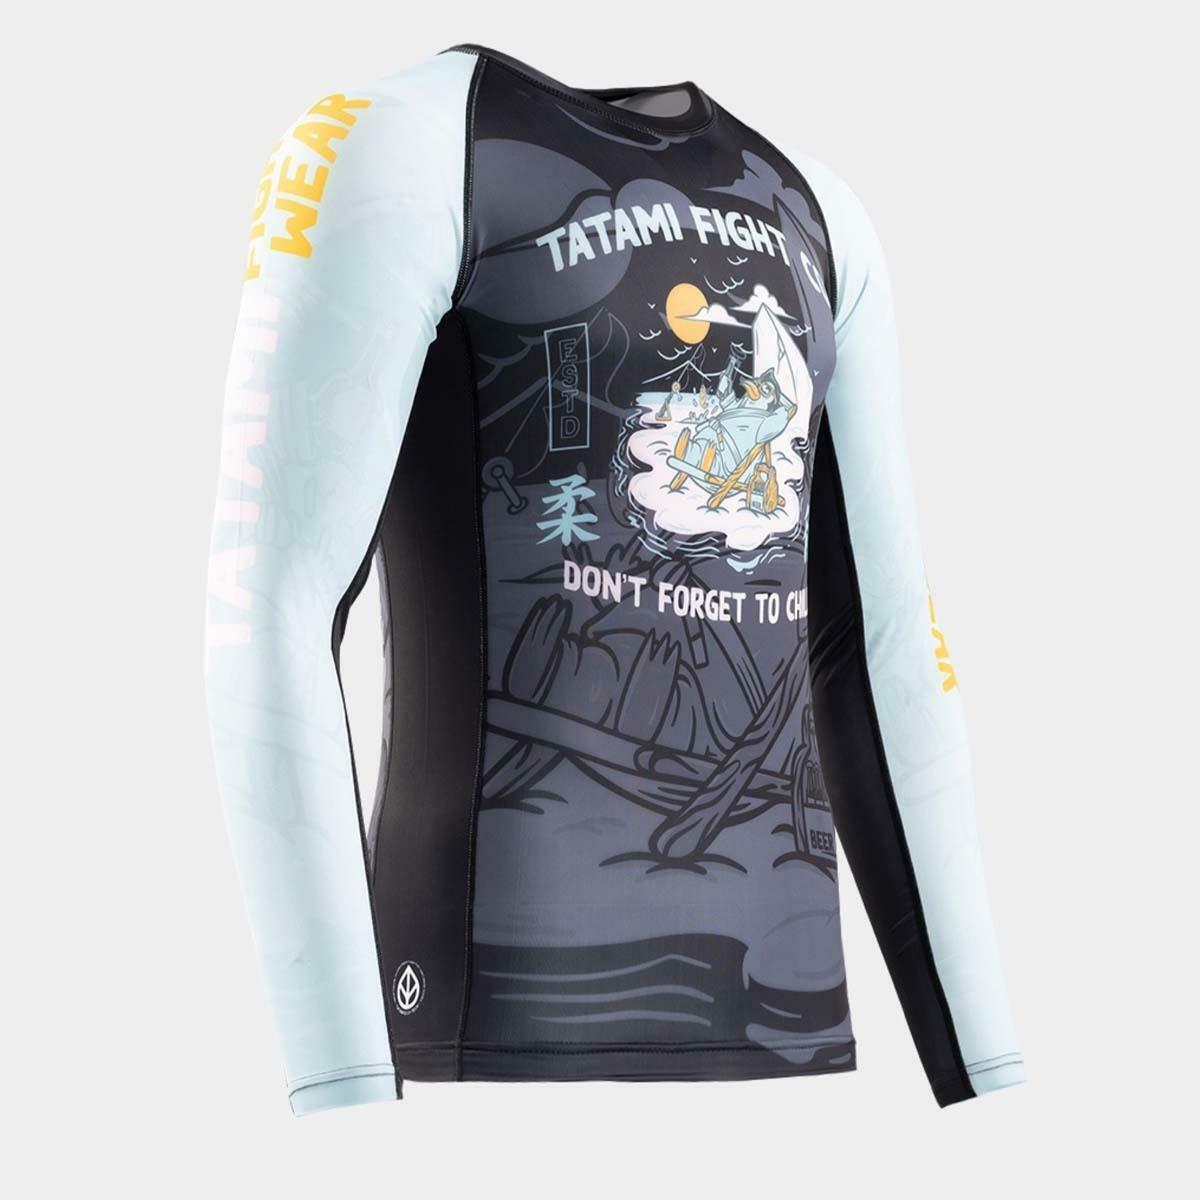 Tatami Dont Forget to Chill Eco Tech Recycled Rash Guard TATRG1166BB